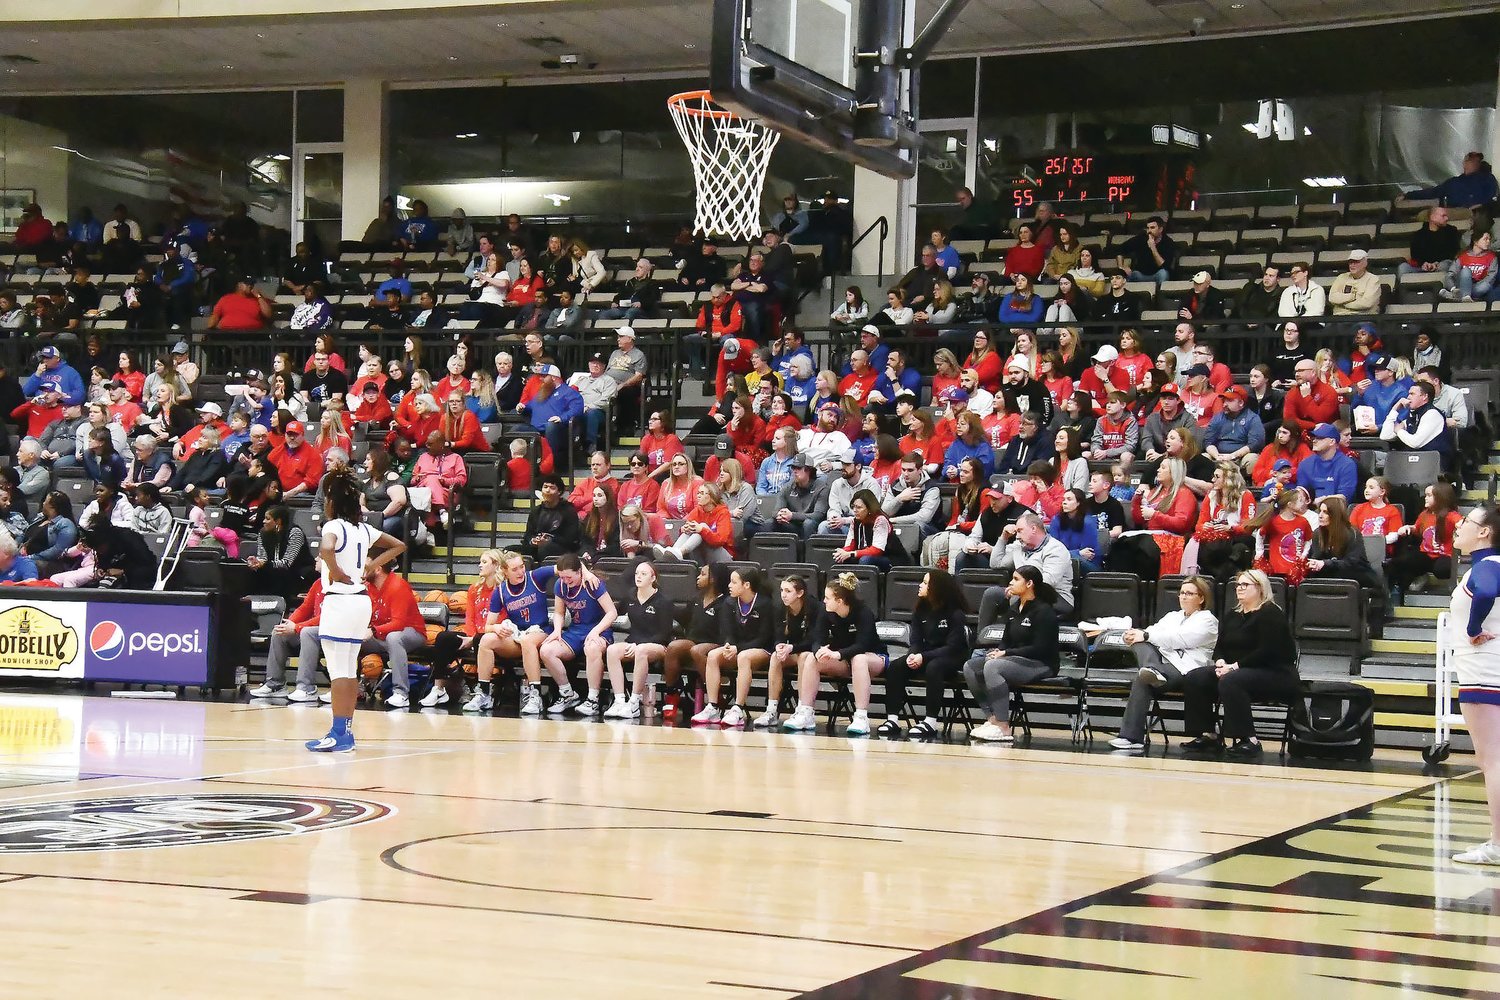 Moberly High School girls basketball fans certainly showed out during the entire Spartans' tournament run.